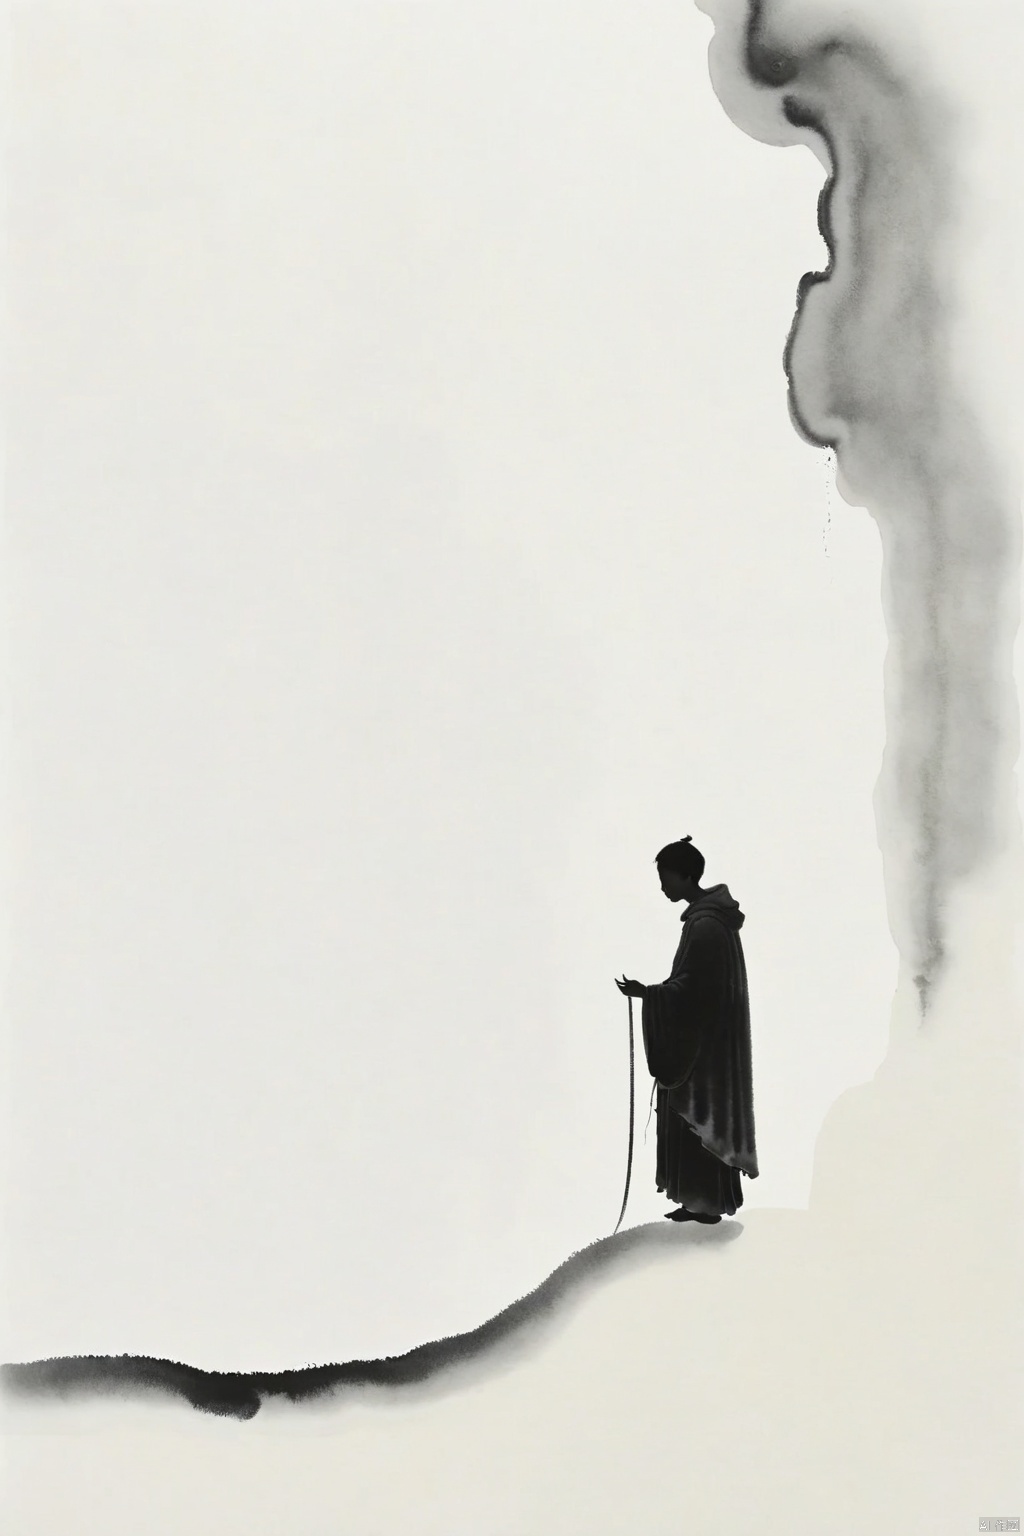 Silhouette of the Great Saint, downward diffusion of ink, large areas of white space, minimalist illustration